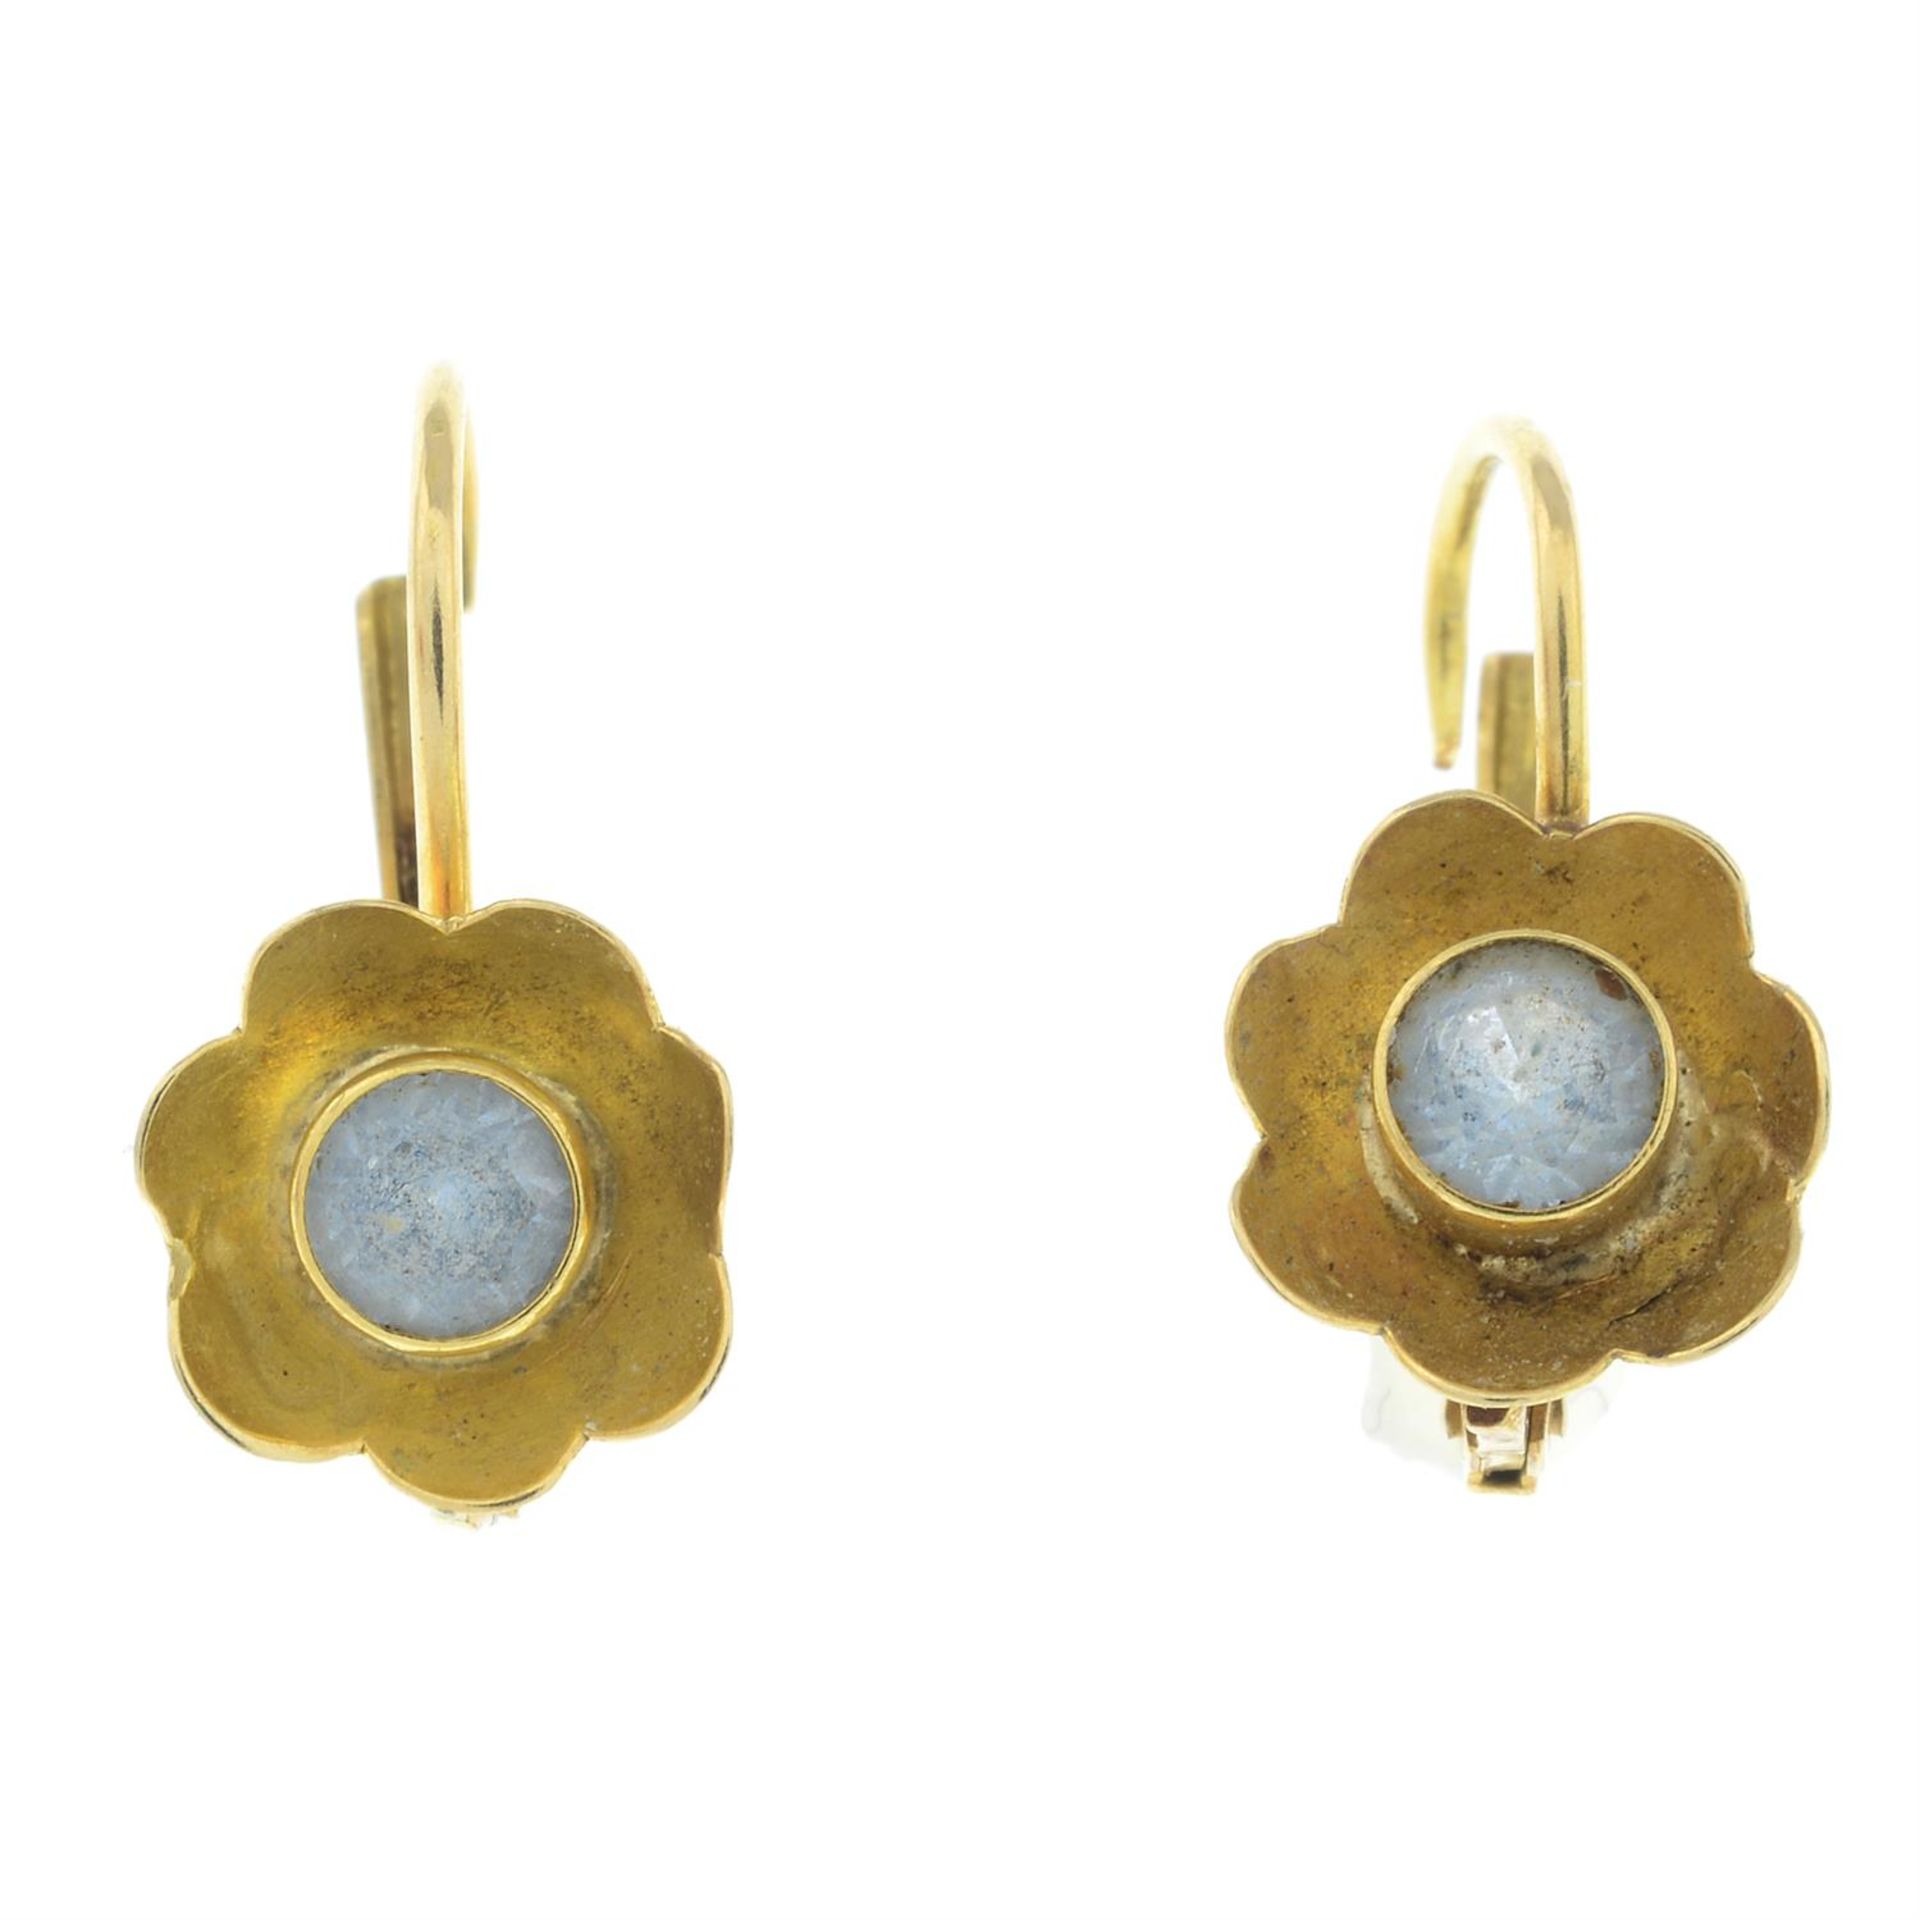 A pair of early to mid 20th century 18ct gold topaz floral motif earrings.